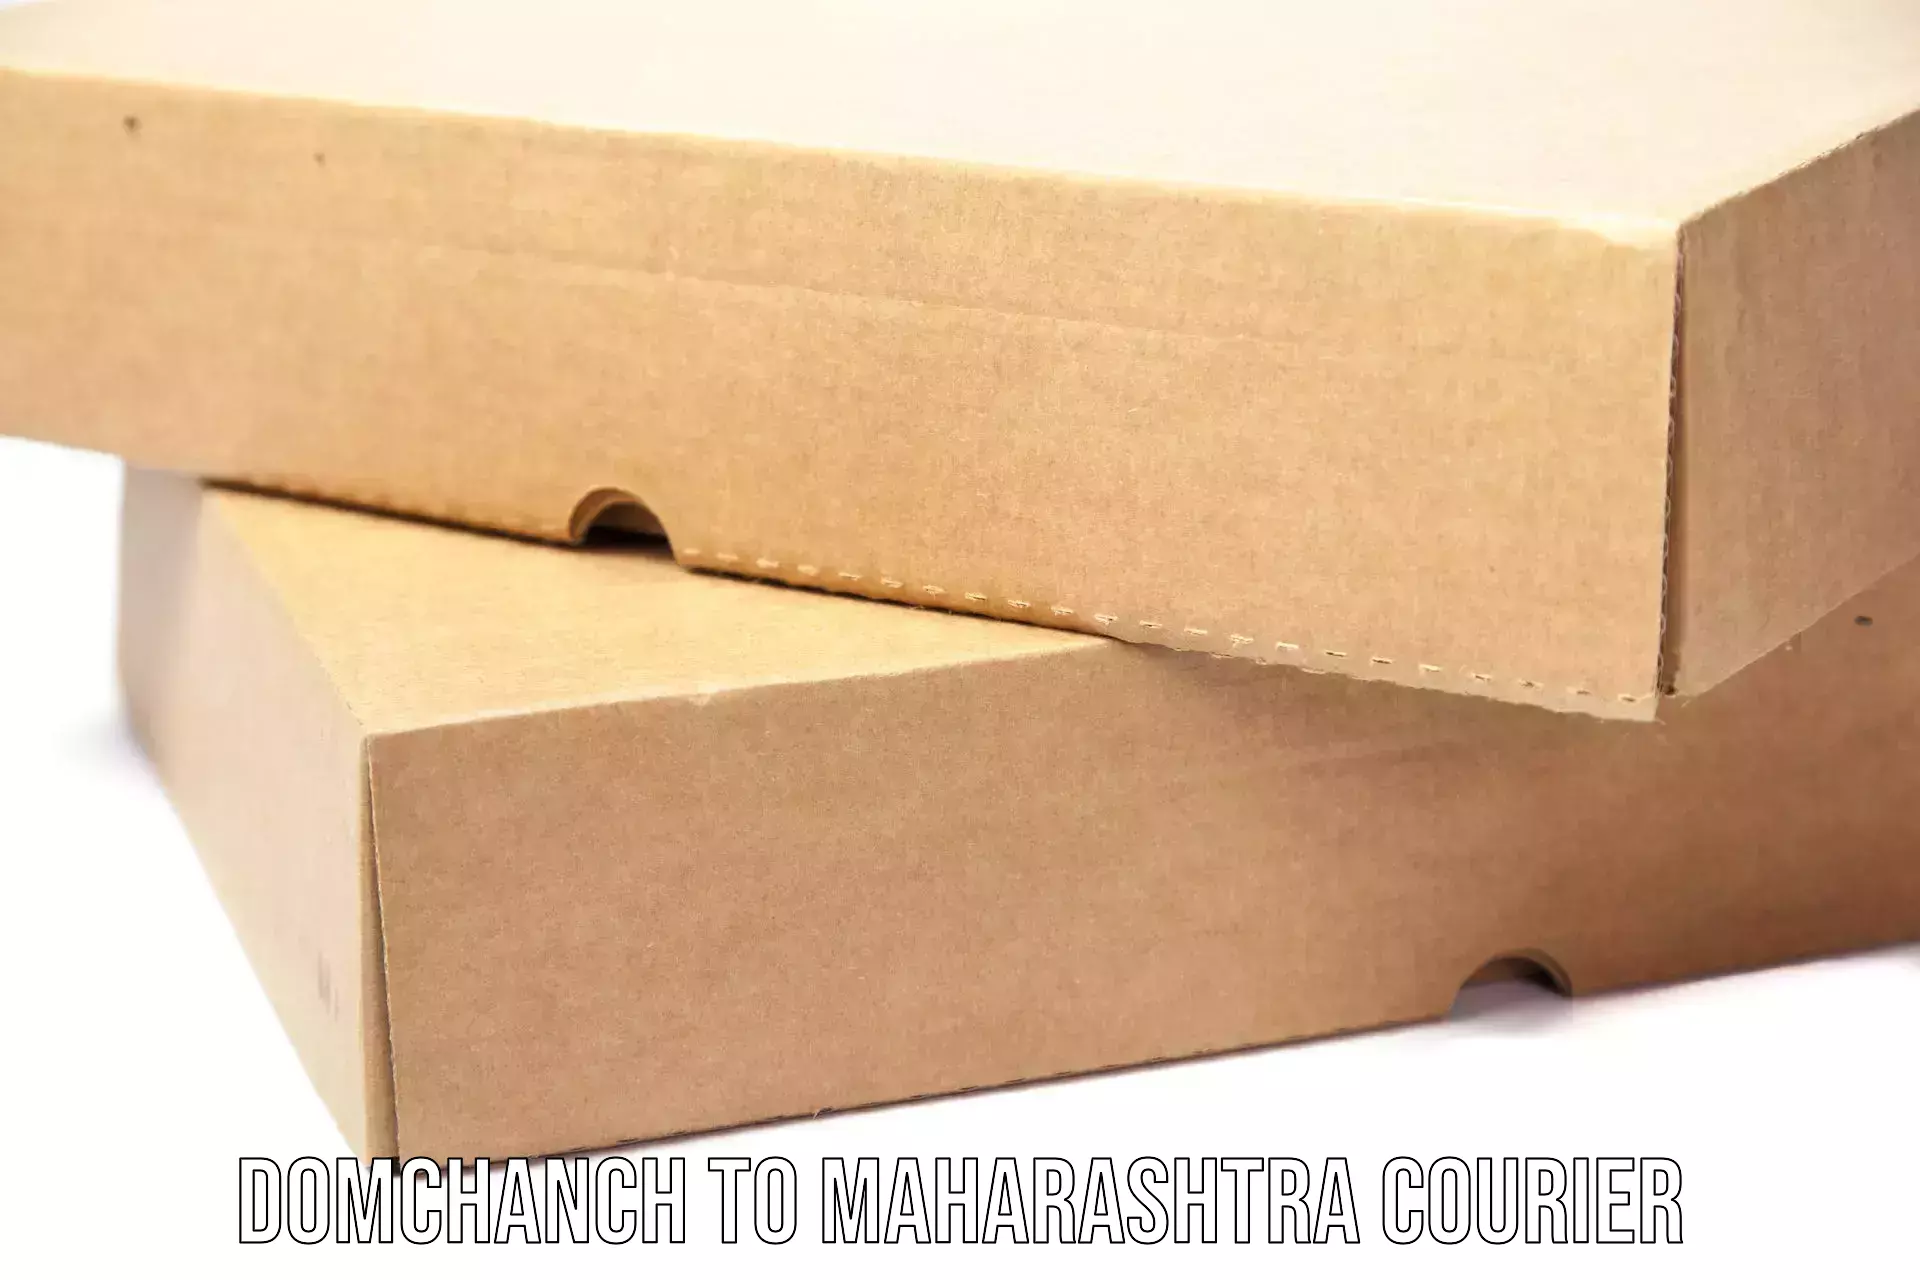 Quality courier services Domchanch to Mumbai